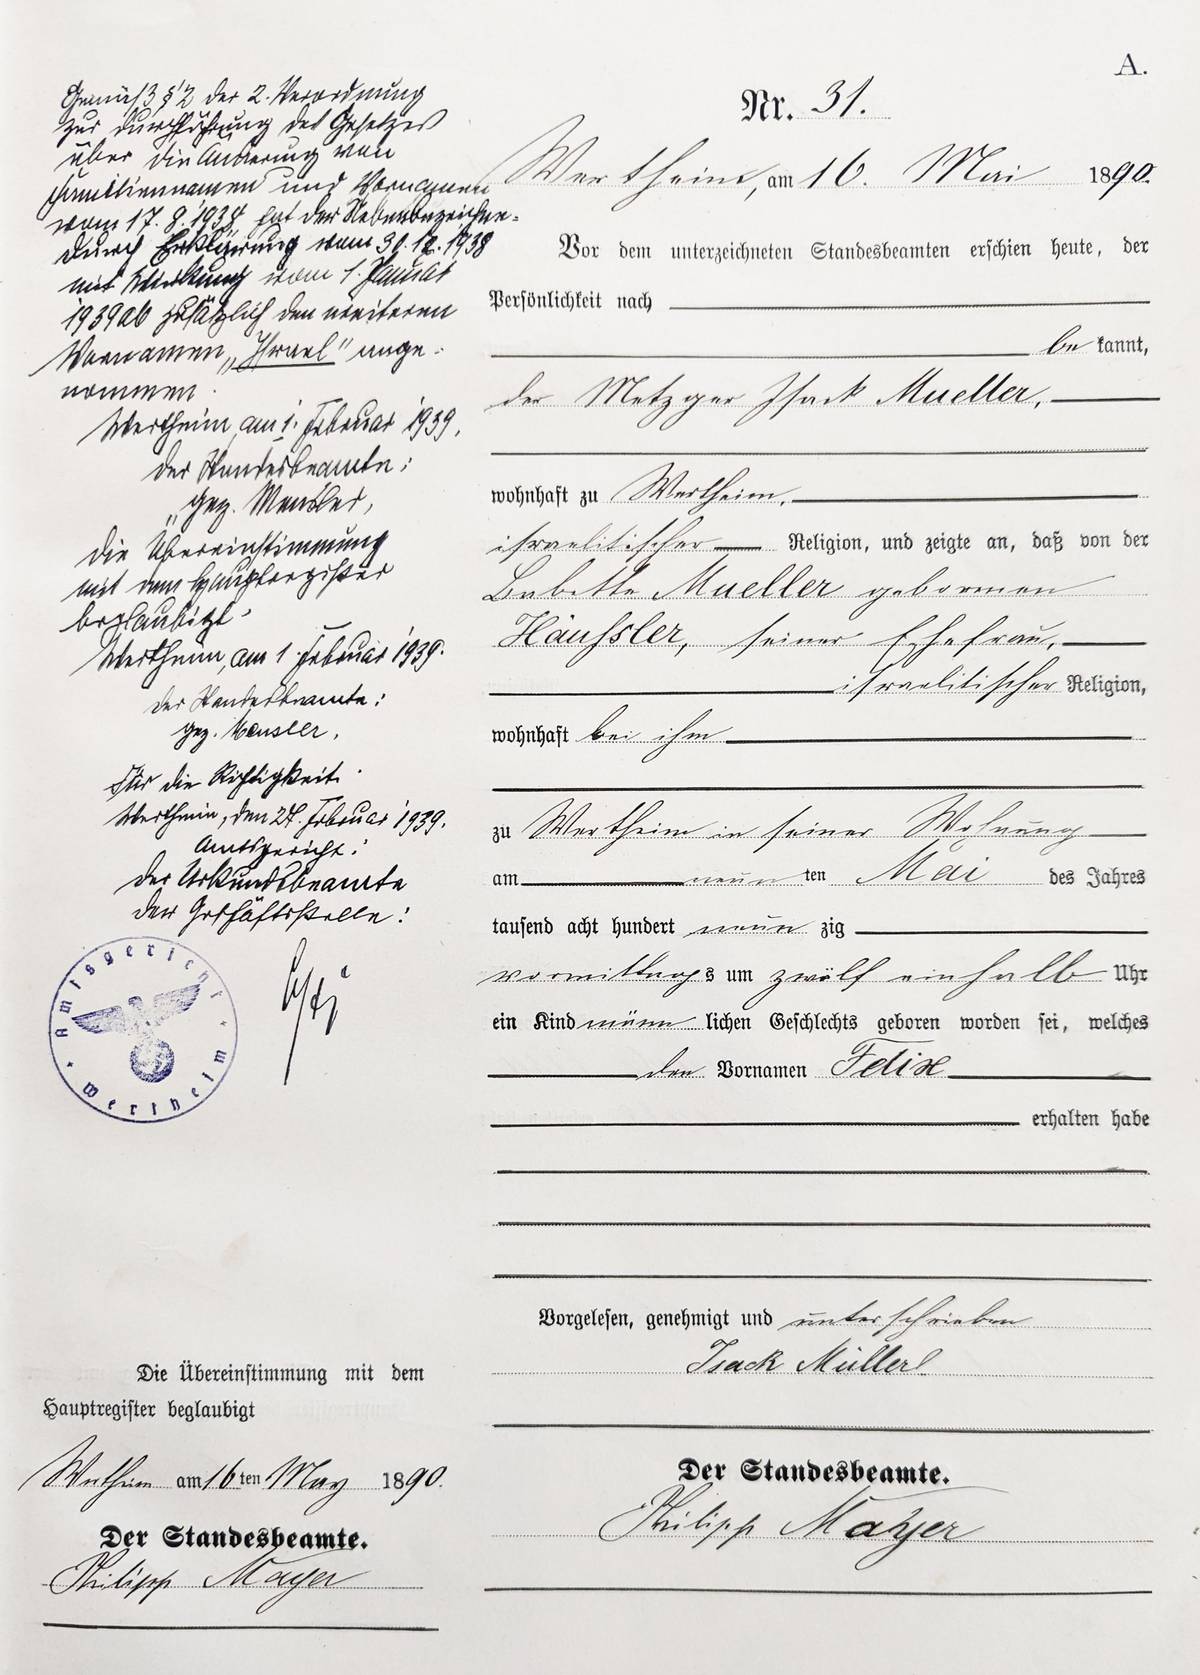 Felix Muller's birth record from Wertheim, with the ‘Israel’ amendment on the left hand side